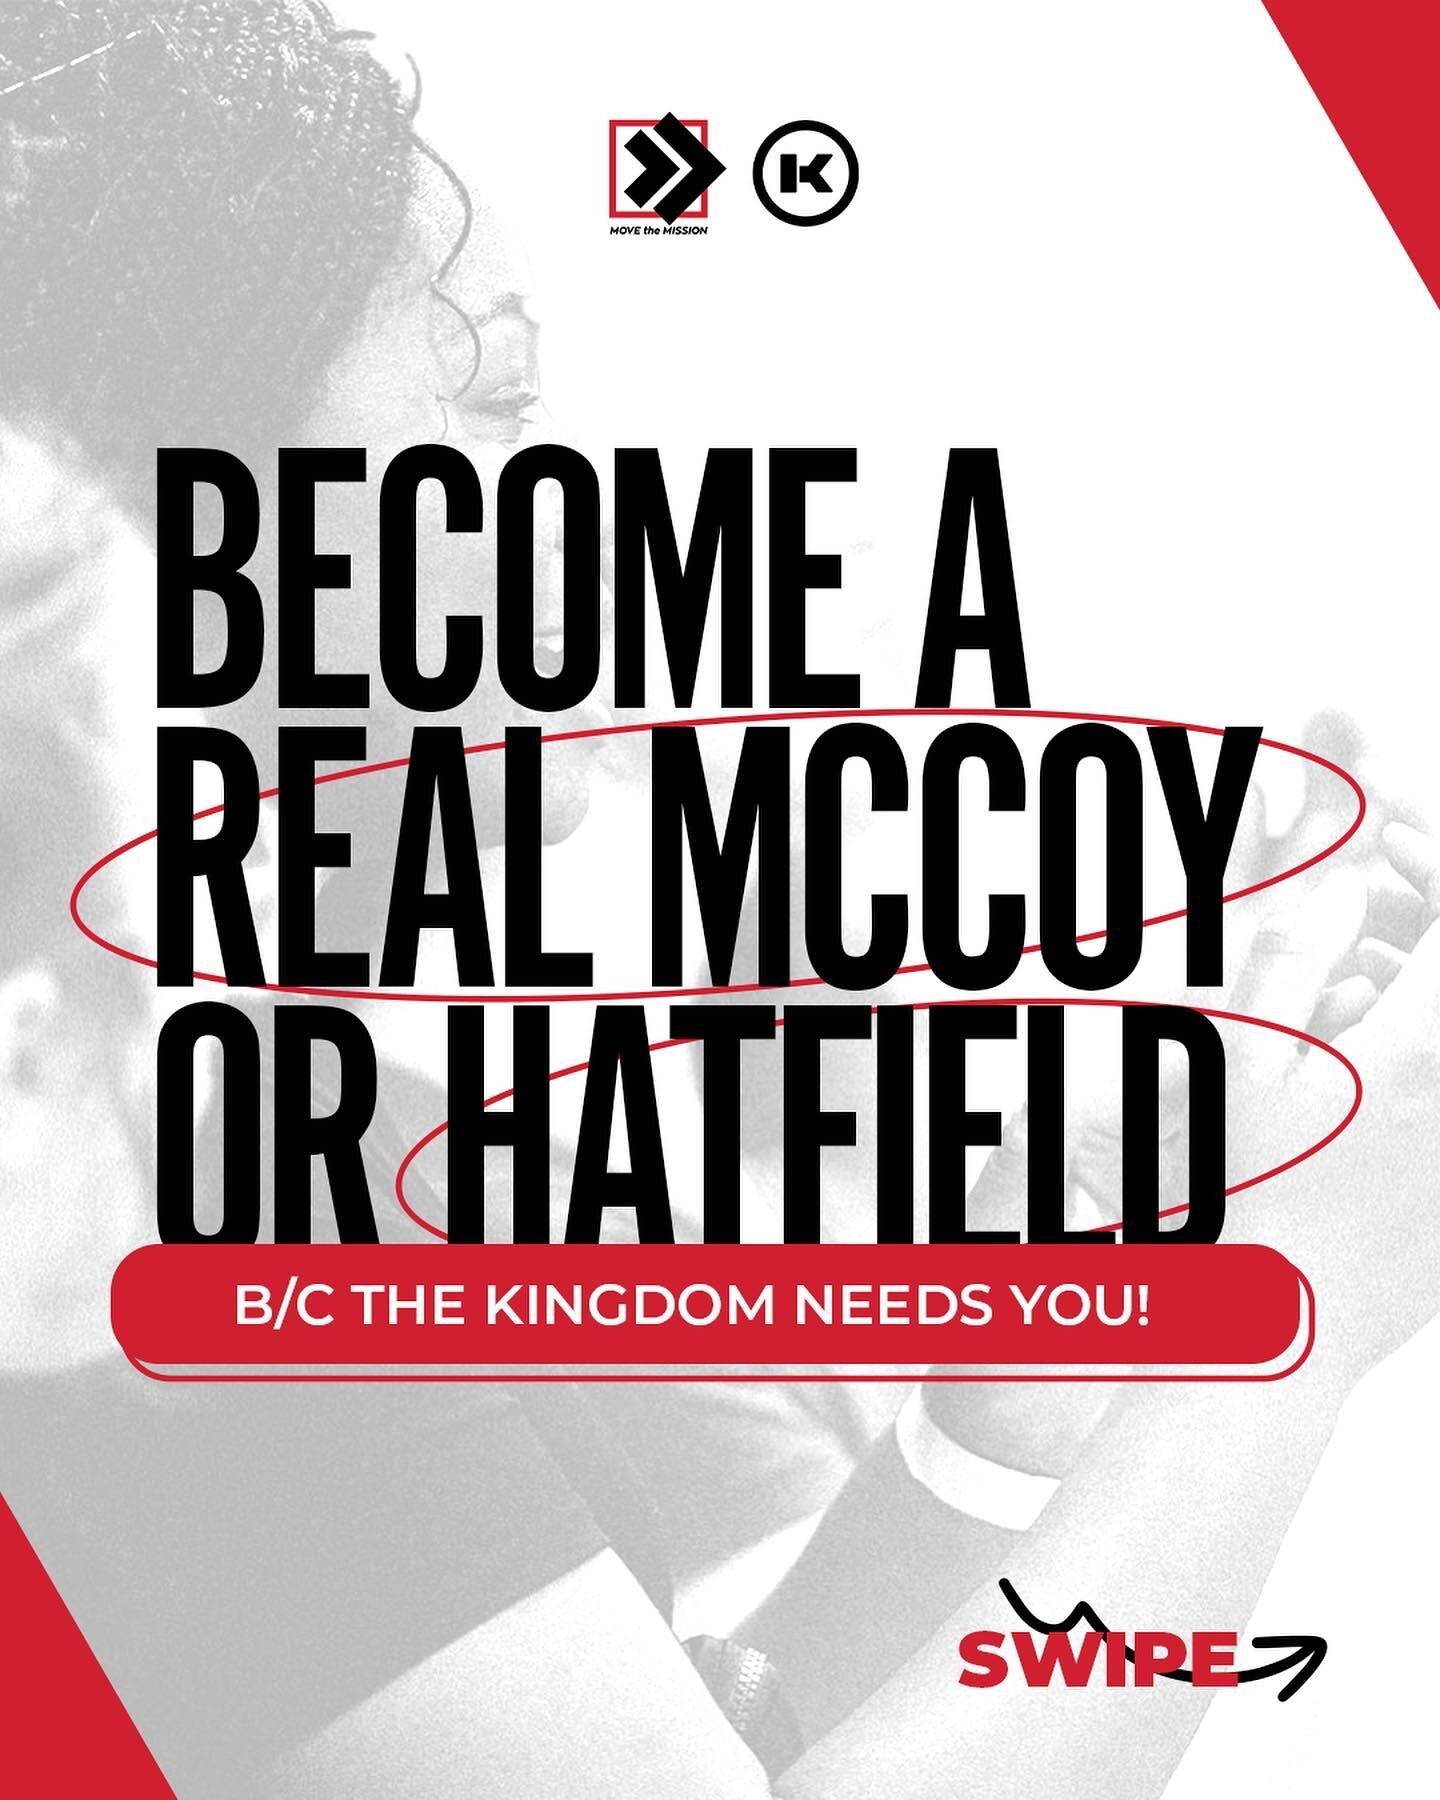 What are you doing to #movethemission !?

Become a Real McCoy or Hatfield by raising money for The Kingdom!